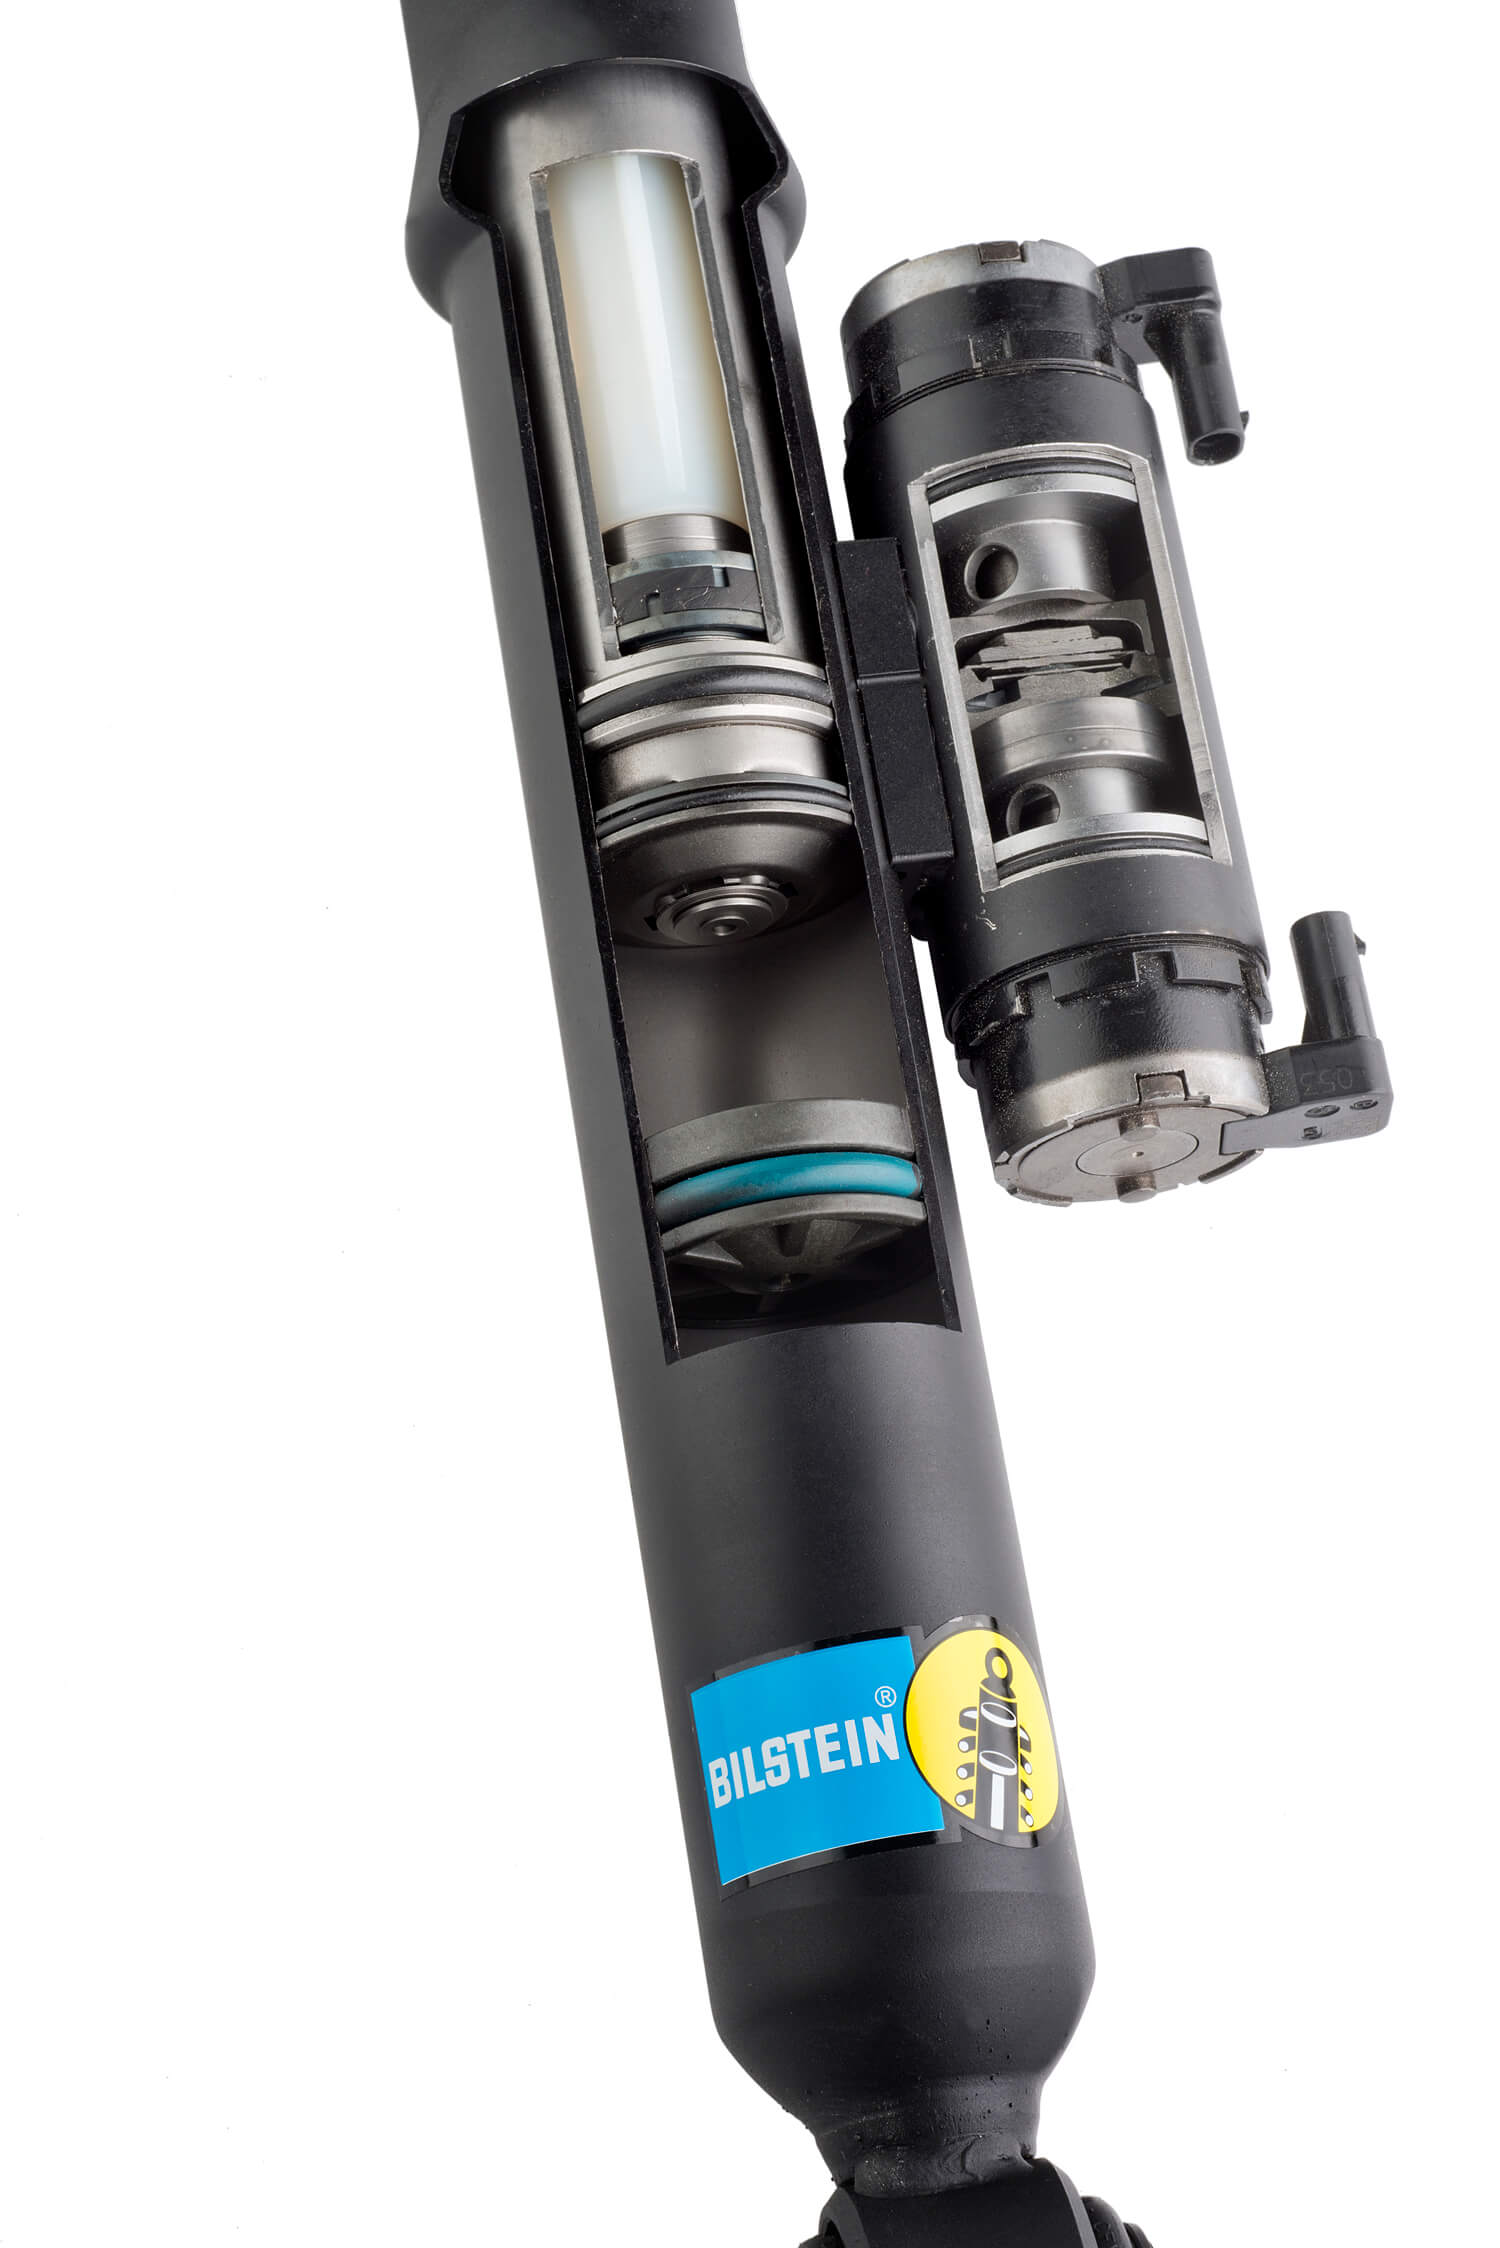 images/productimages/small/Bilstein_B16-Damptronic2.jpg